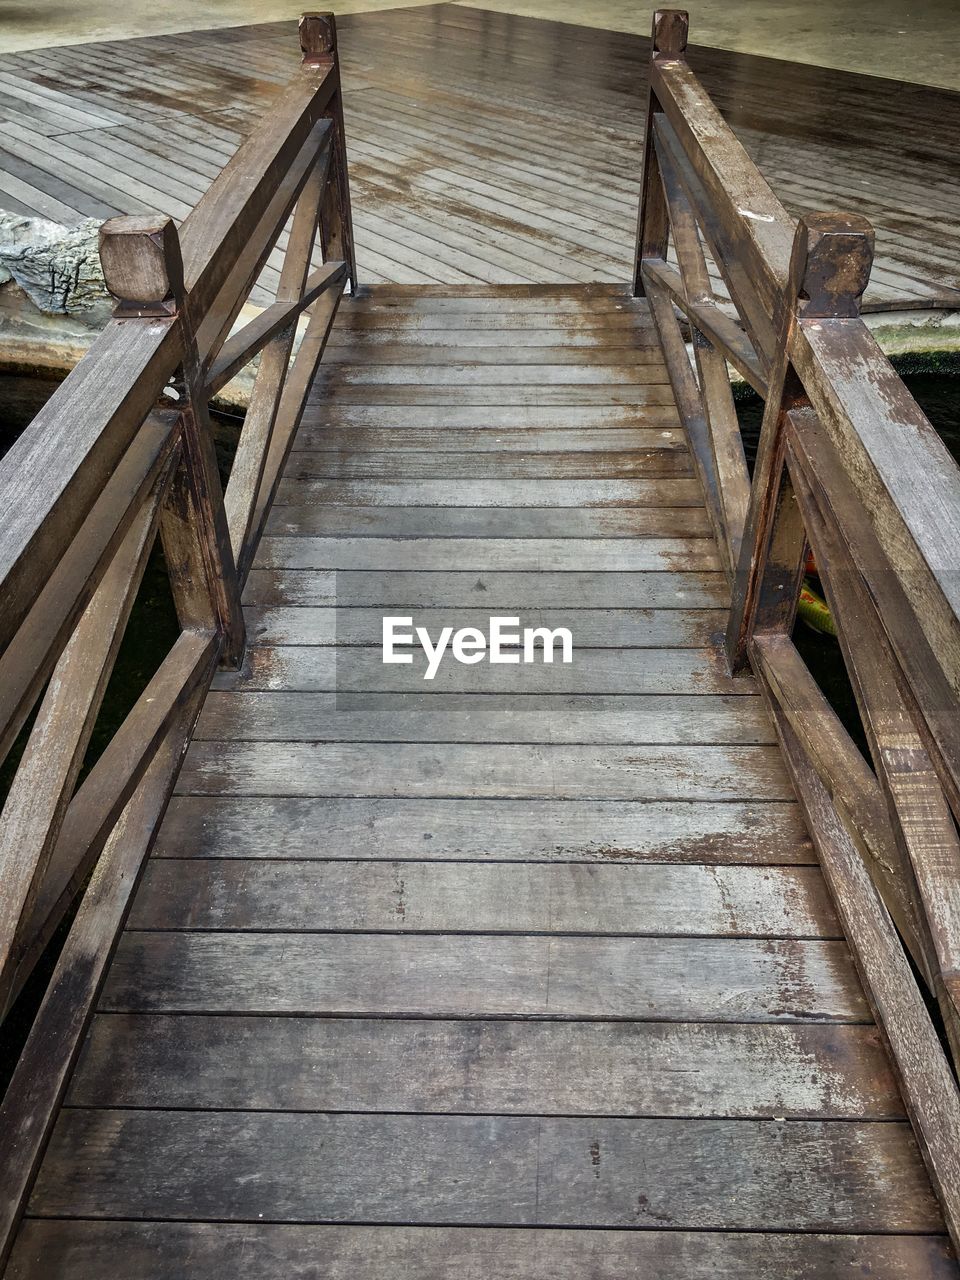 HIGH ANGLE VIEW OF WOODEN BOARDWALK LEADING TO SURFACE